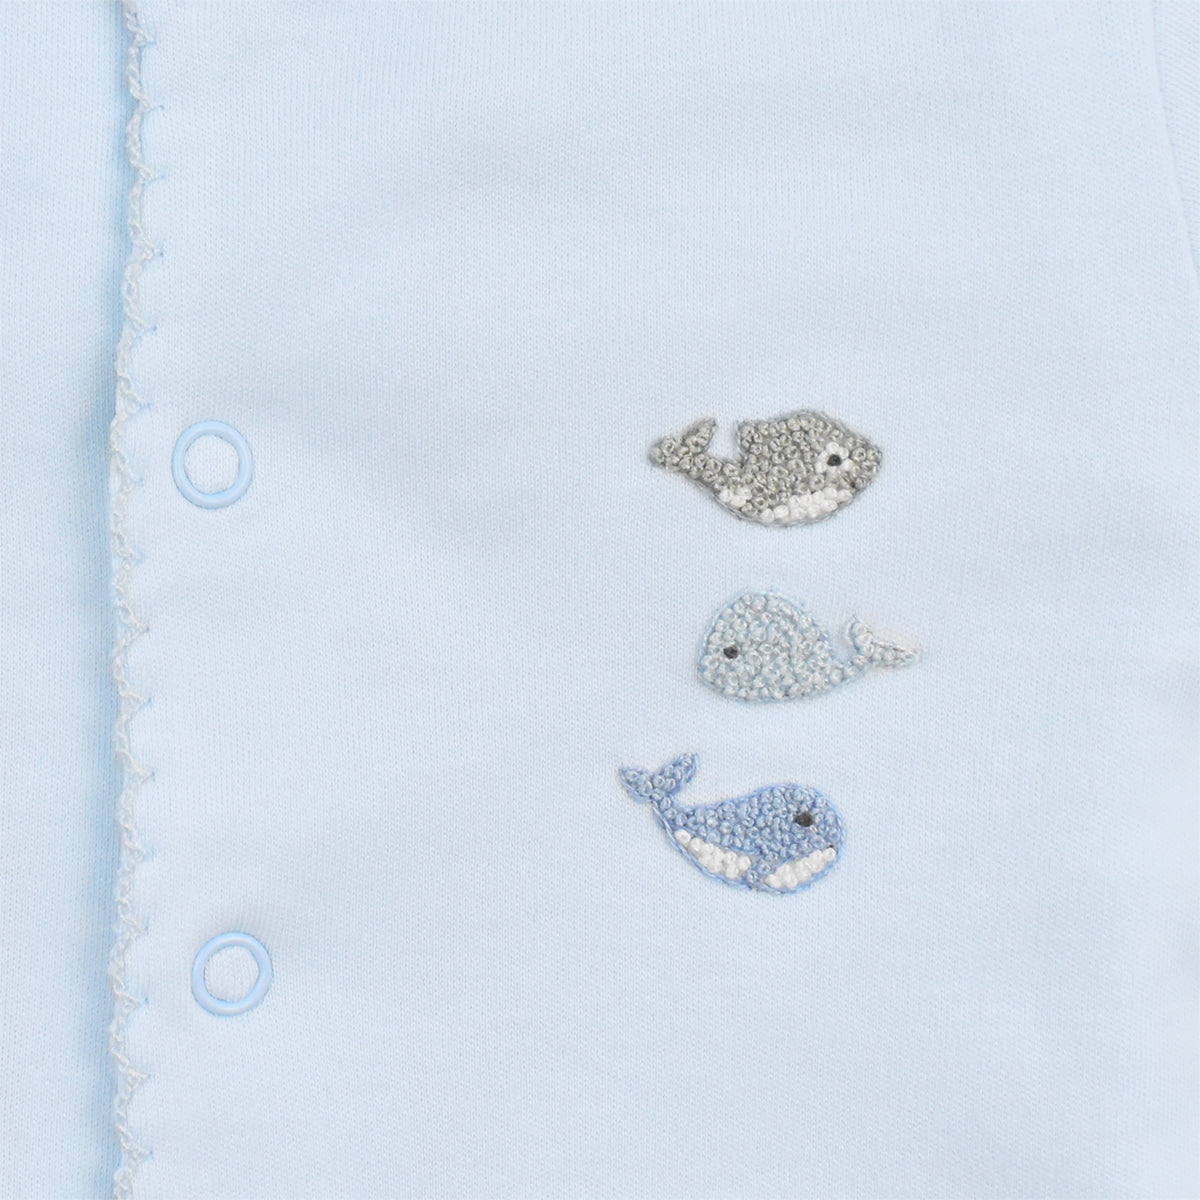 Cute Tiny Whales Set 2 Pieces | Baby Boy